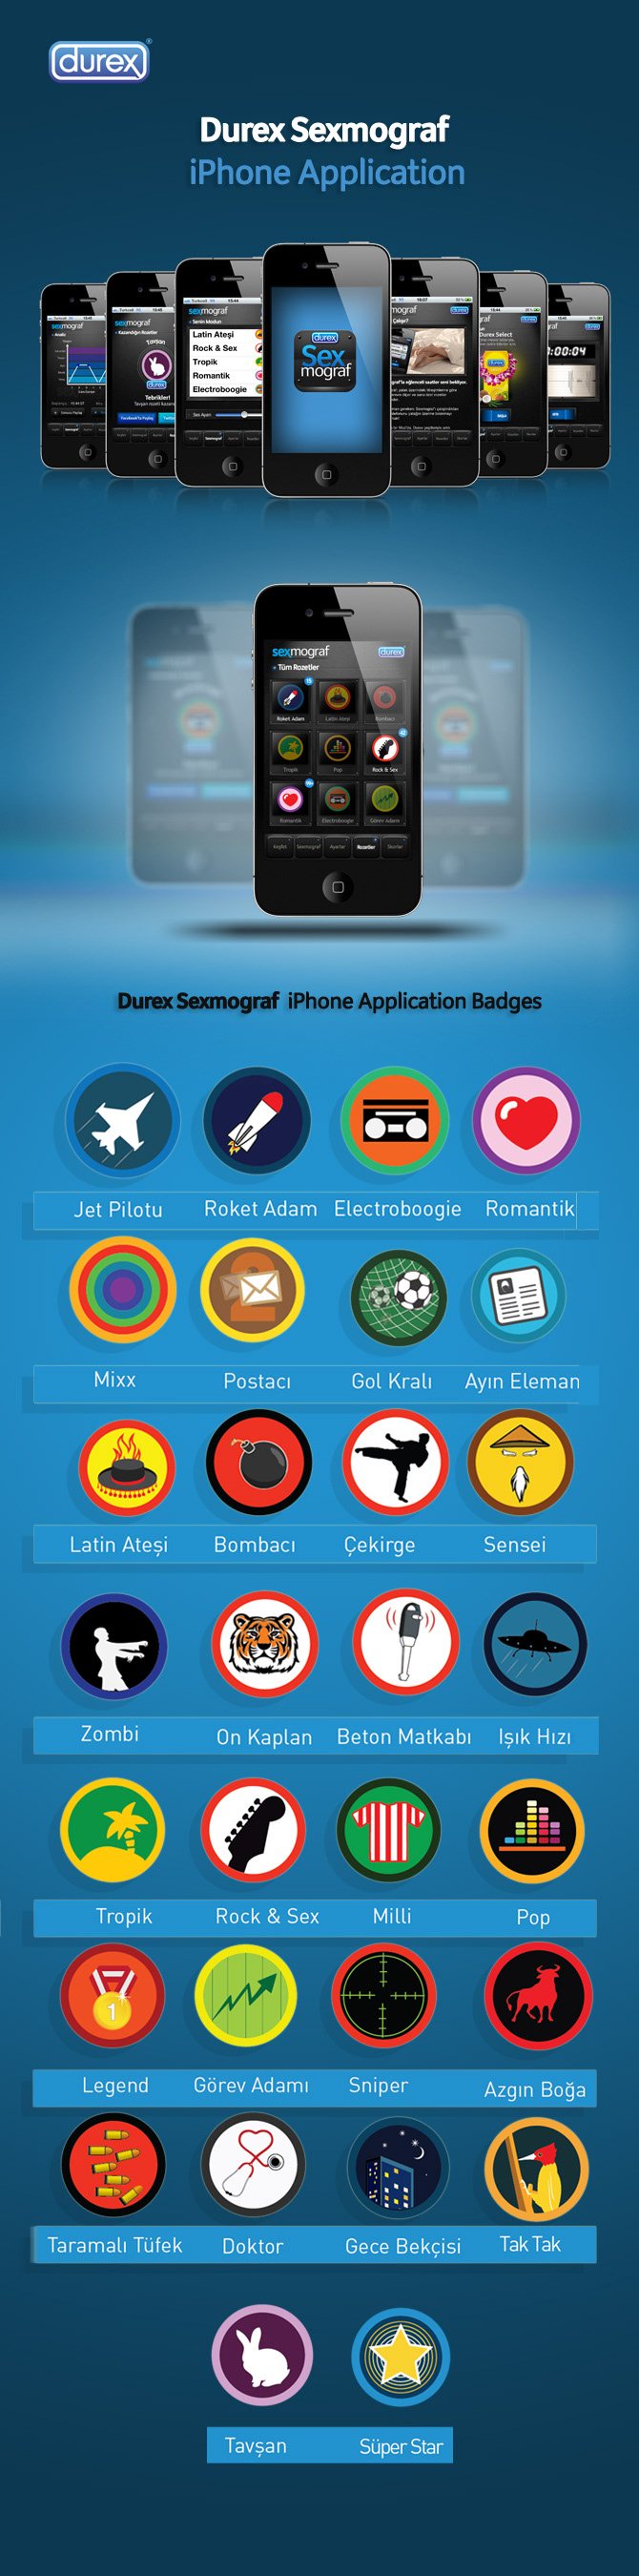 iphone  Application Icon Badges illustrations vector sexmograf   durex livestyle